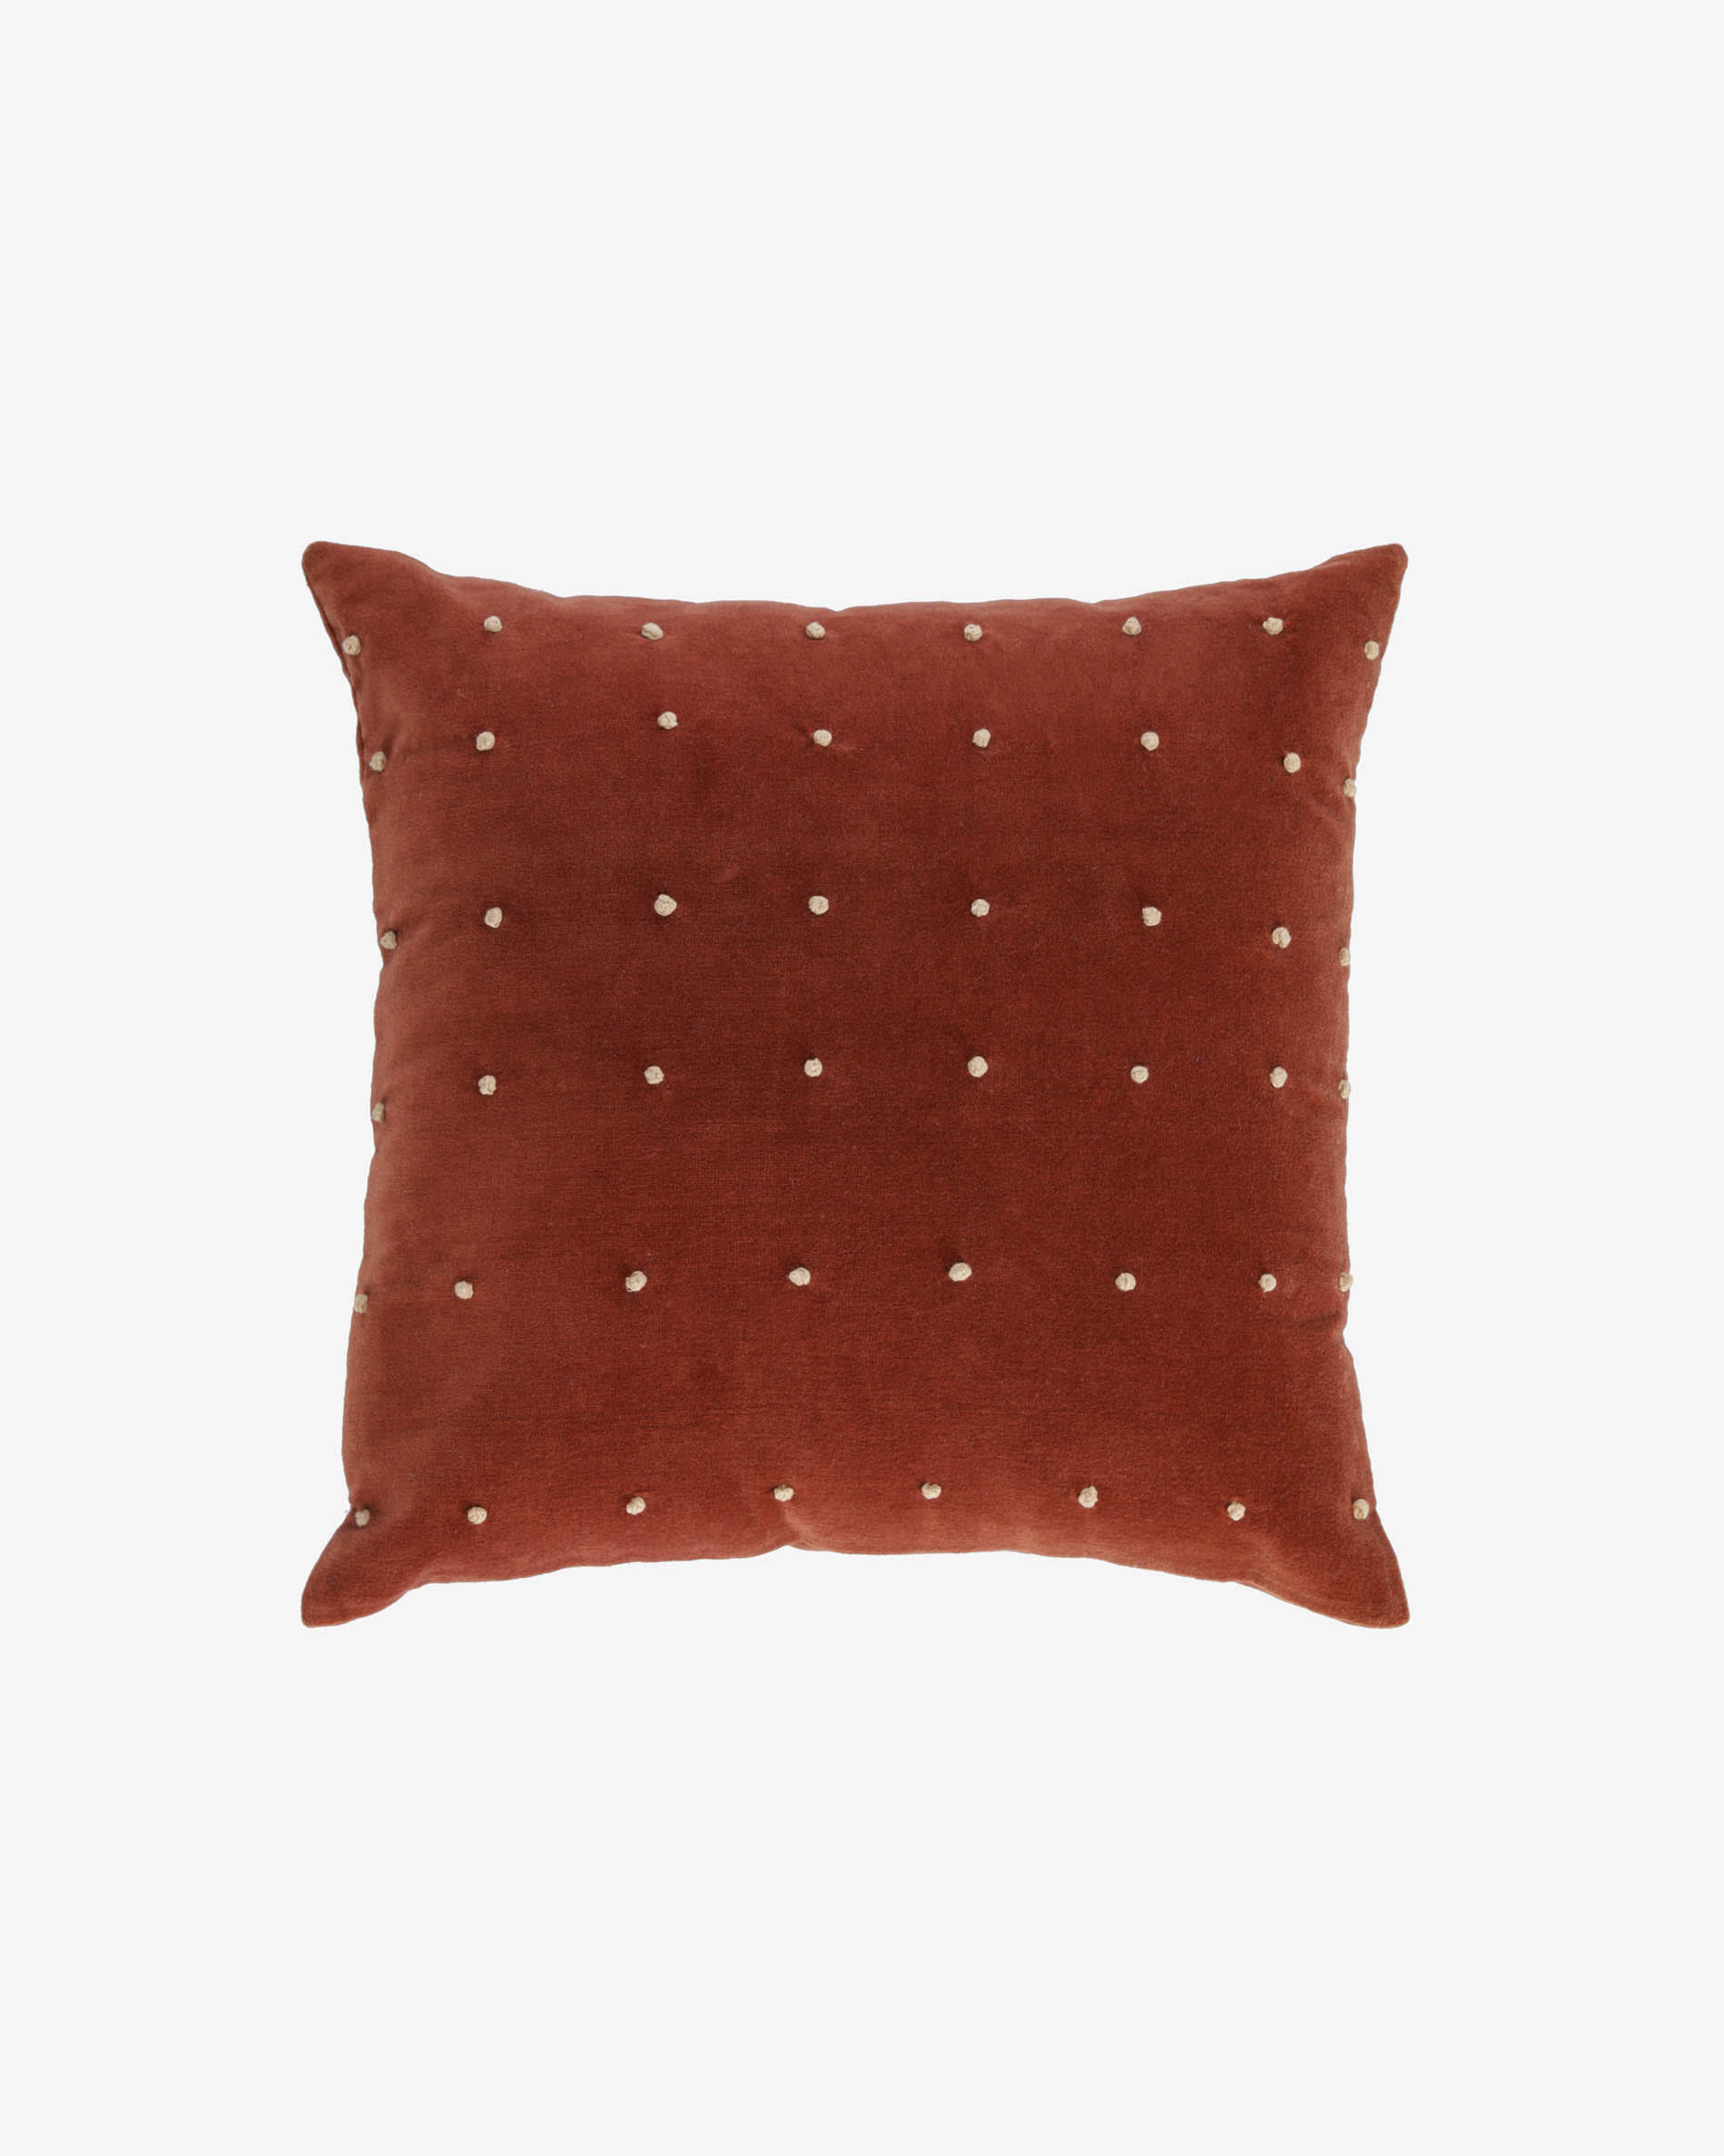 Aines maroon corduroy cushion cover 45 x 45 cm | Kave Home